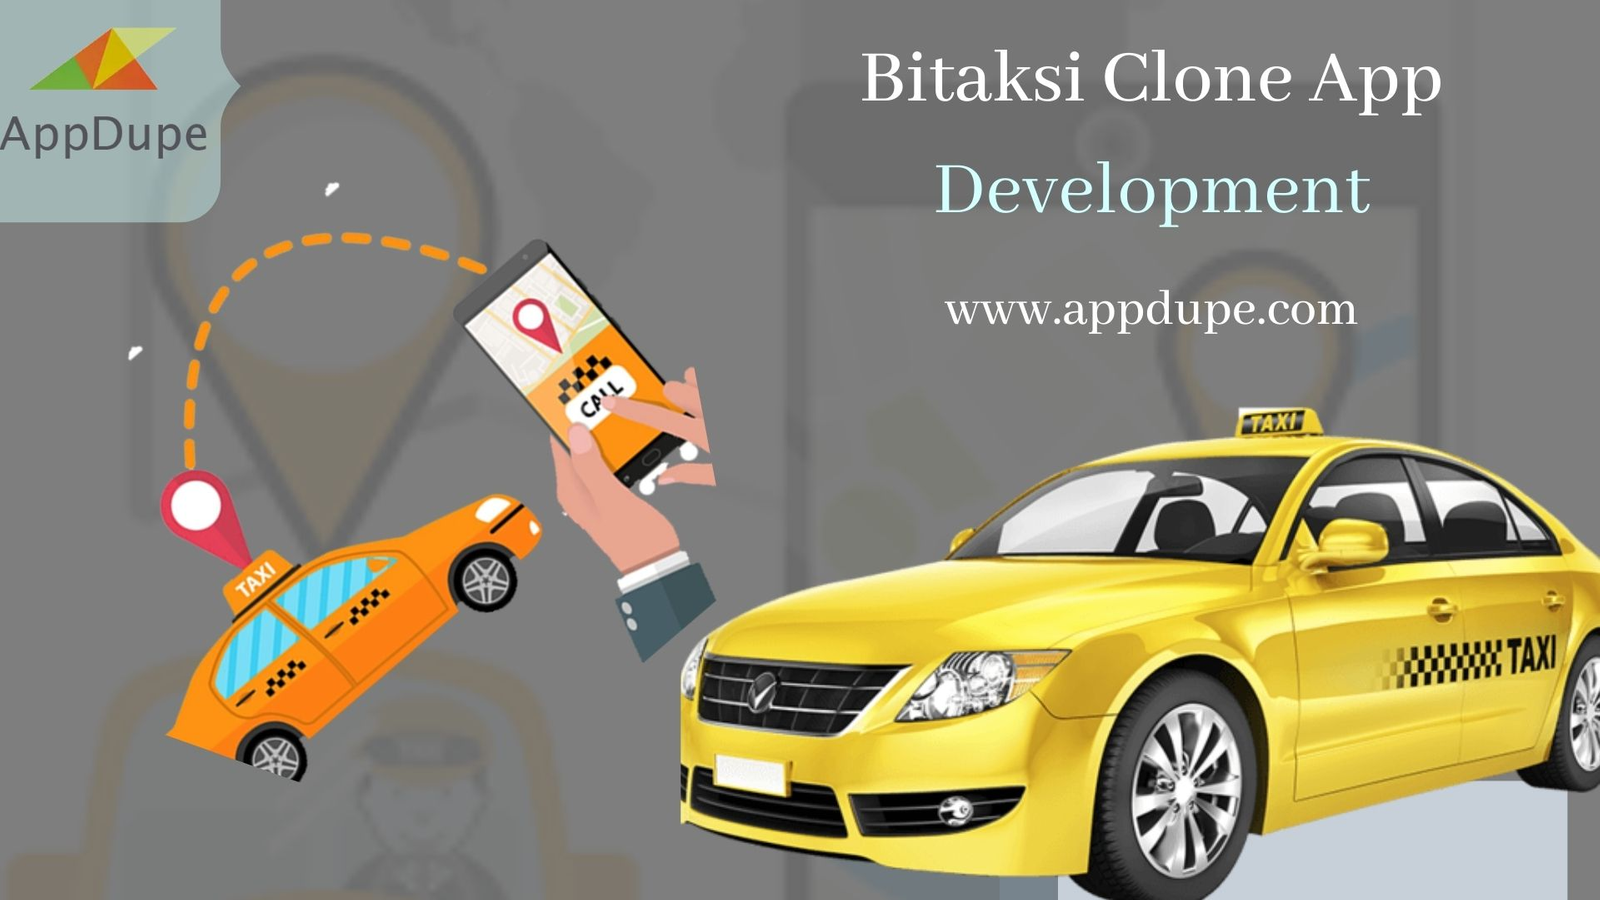 Top 8 attractive features of the ride-sharing app like Bitaksi